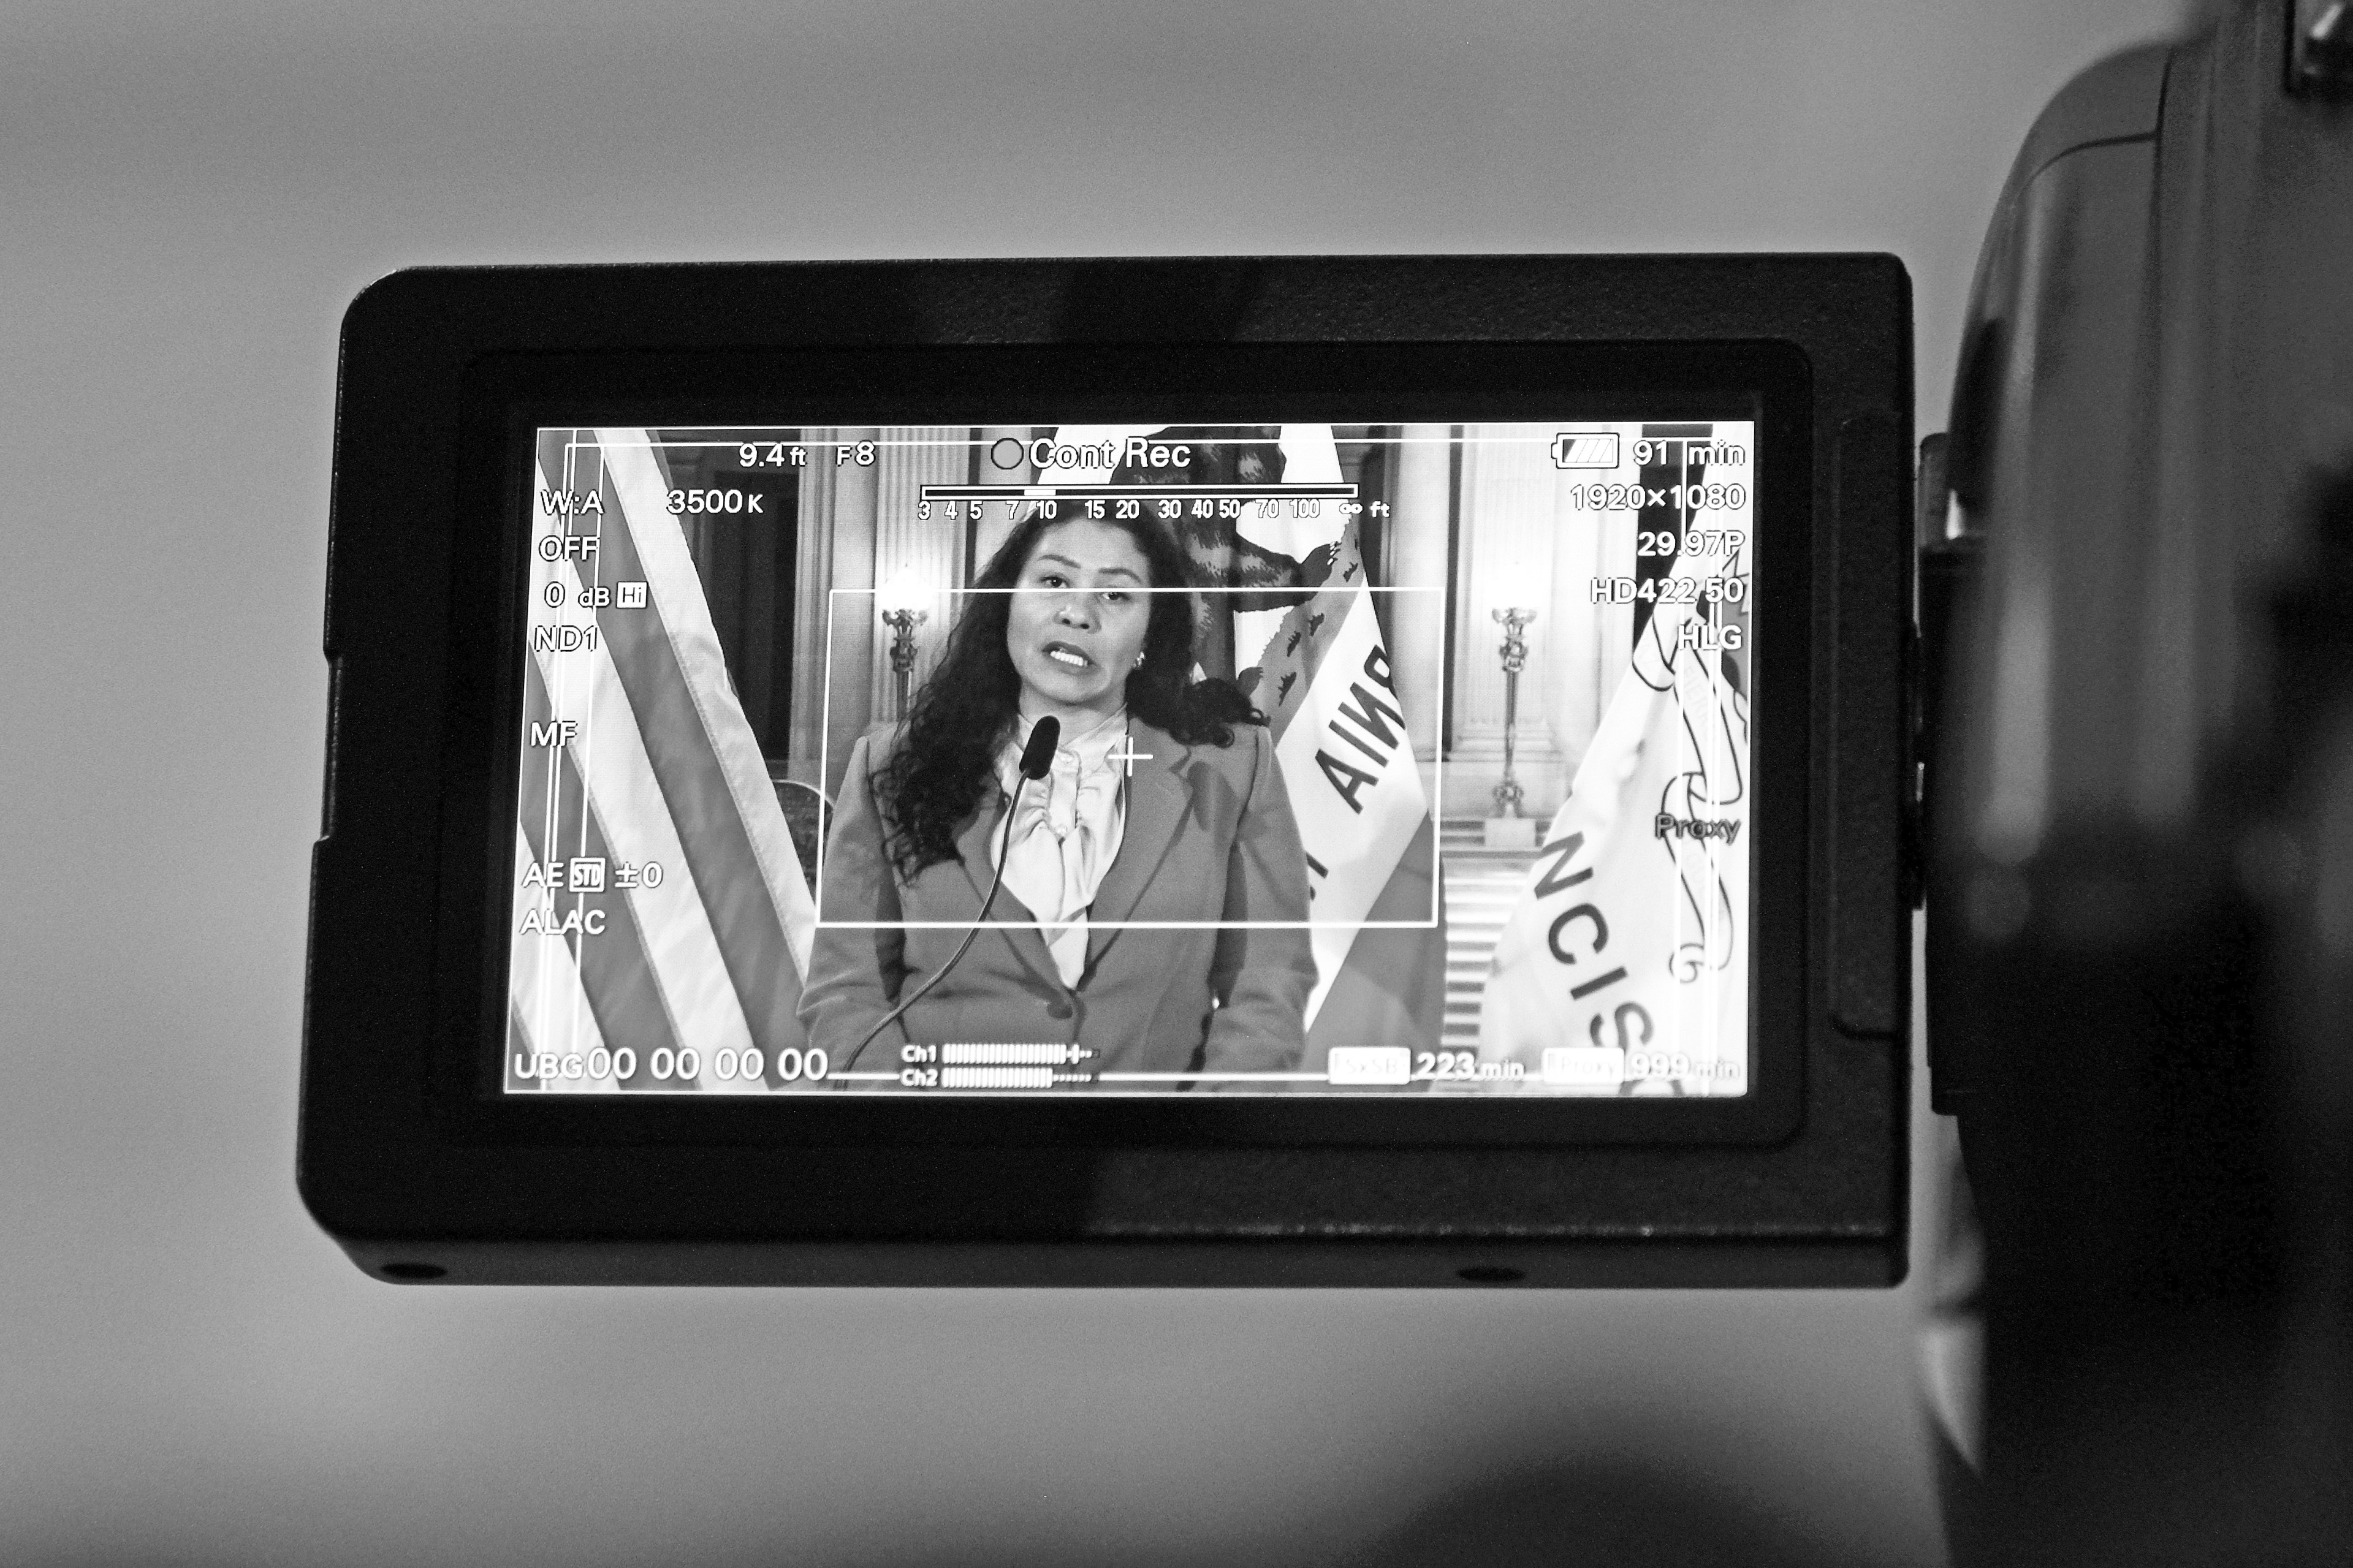 A camera's LCD screen shows San Francisco Mayor London Breed speaking, with camera settings overlaid, all in grayscale.